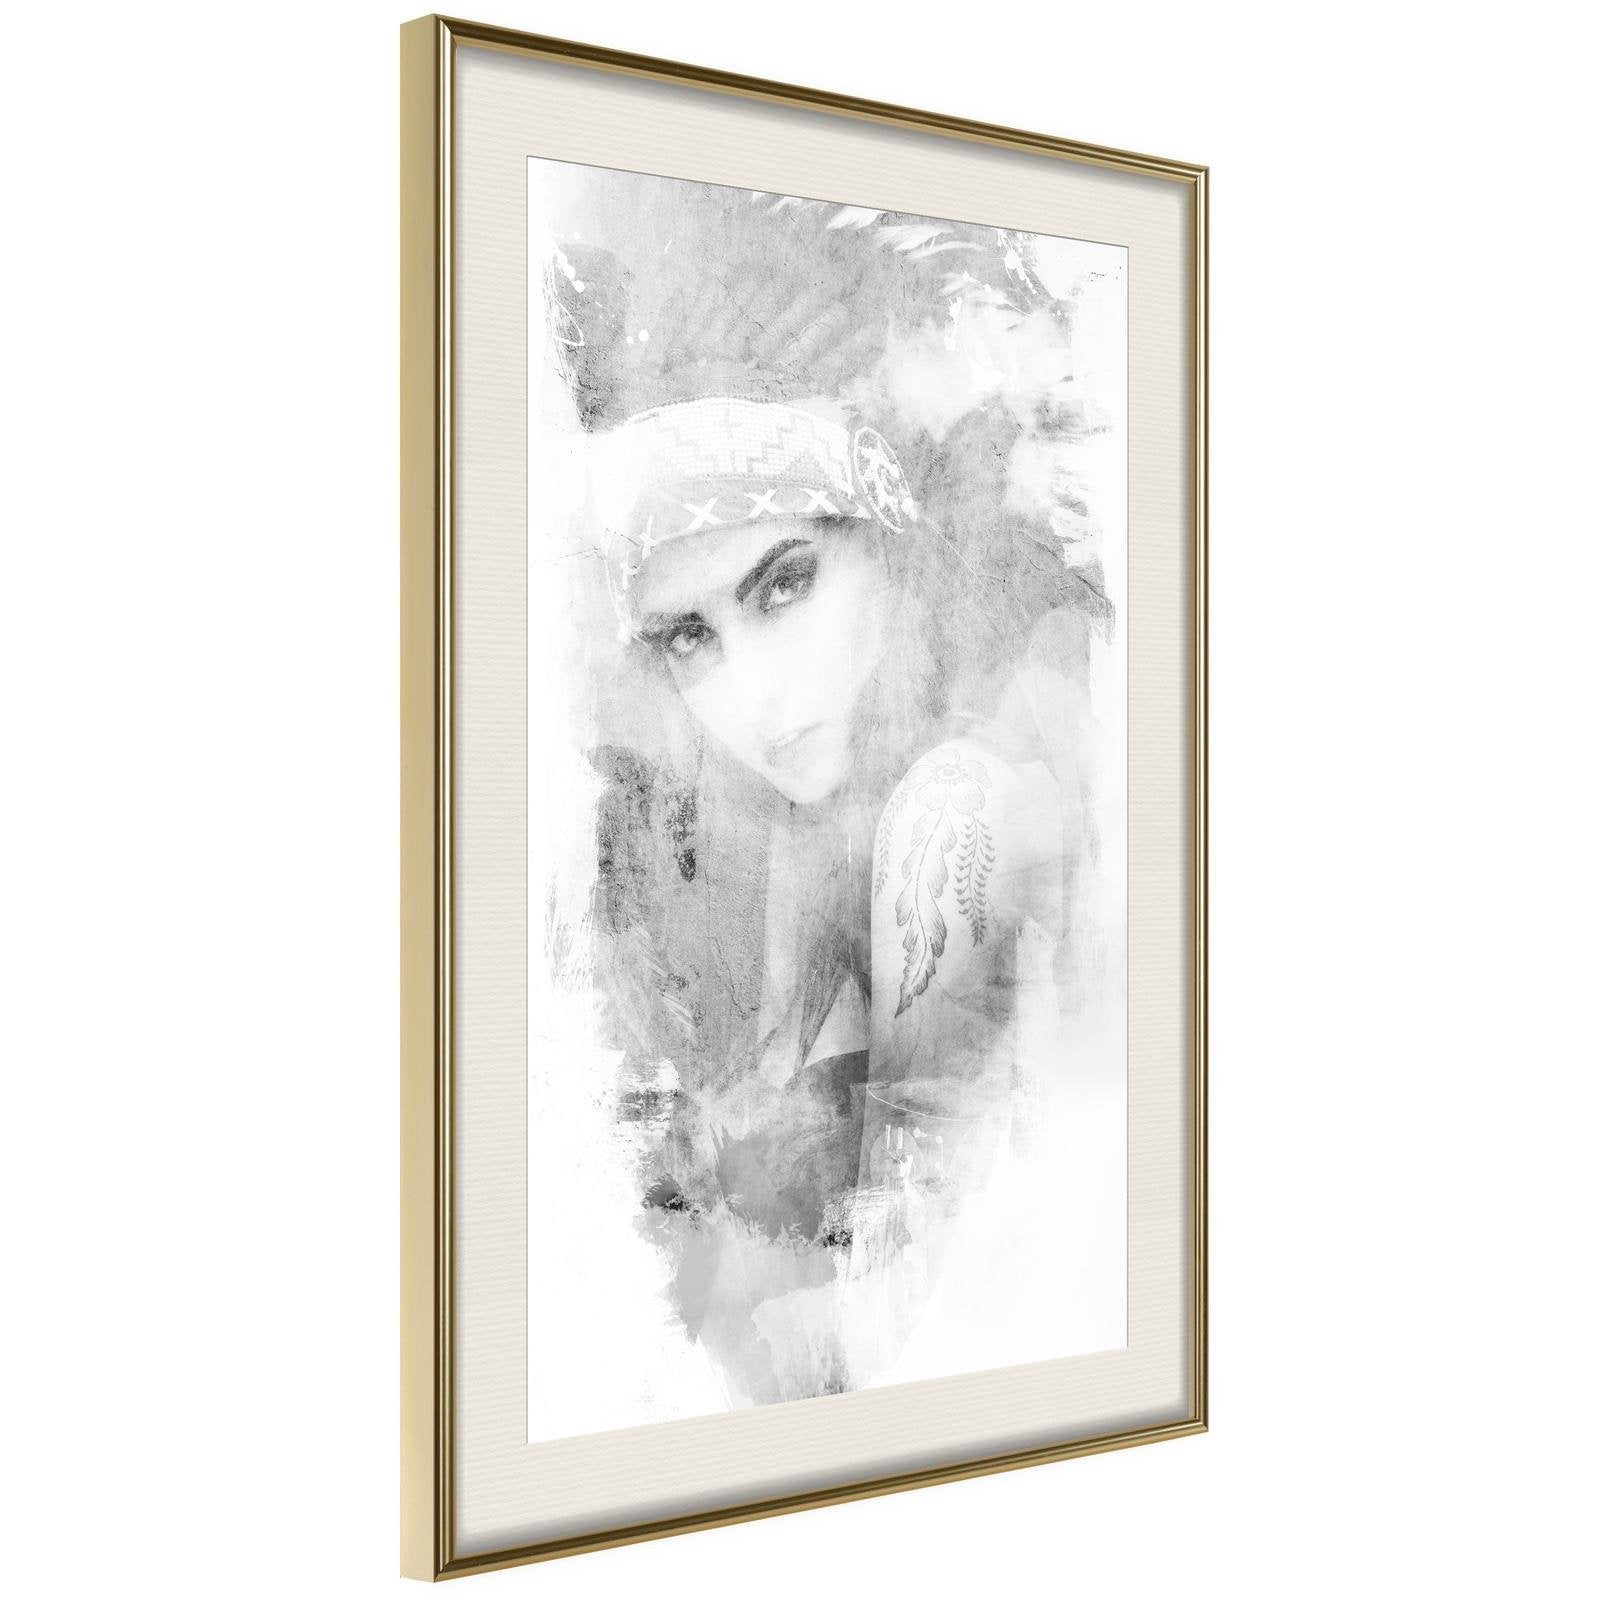 Inramad Poster / Tavla - Mysterious Look (Grey)-Poster Inramad-Artgeist-20x30-Guldram med passepartout-peaceofhome.se